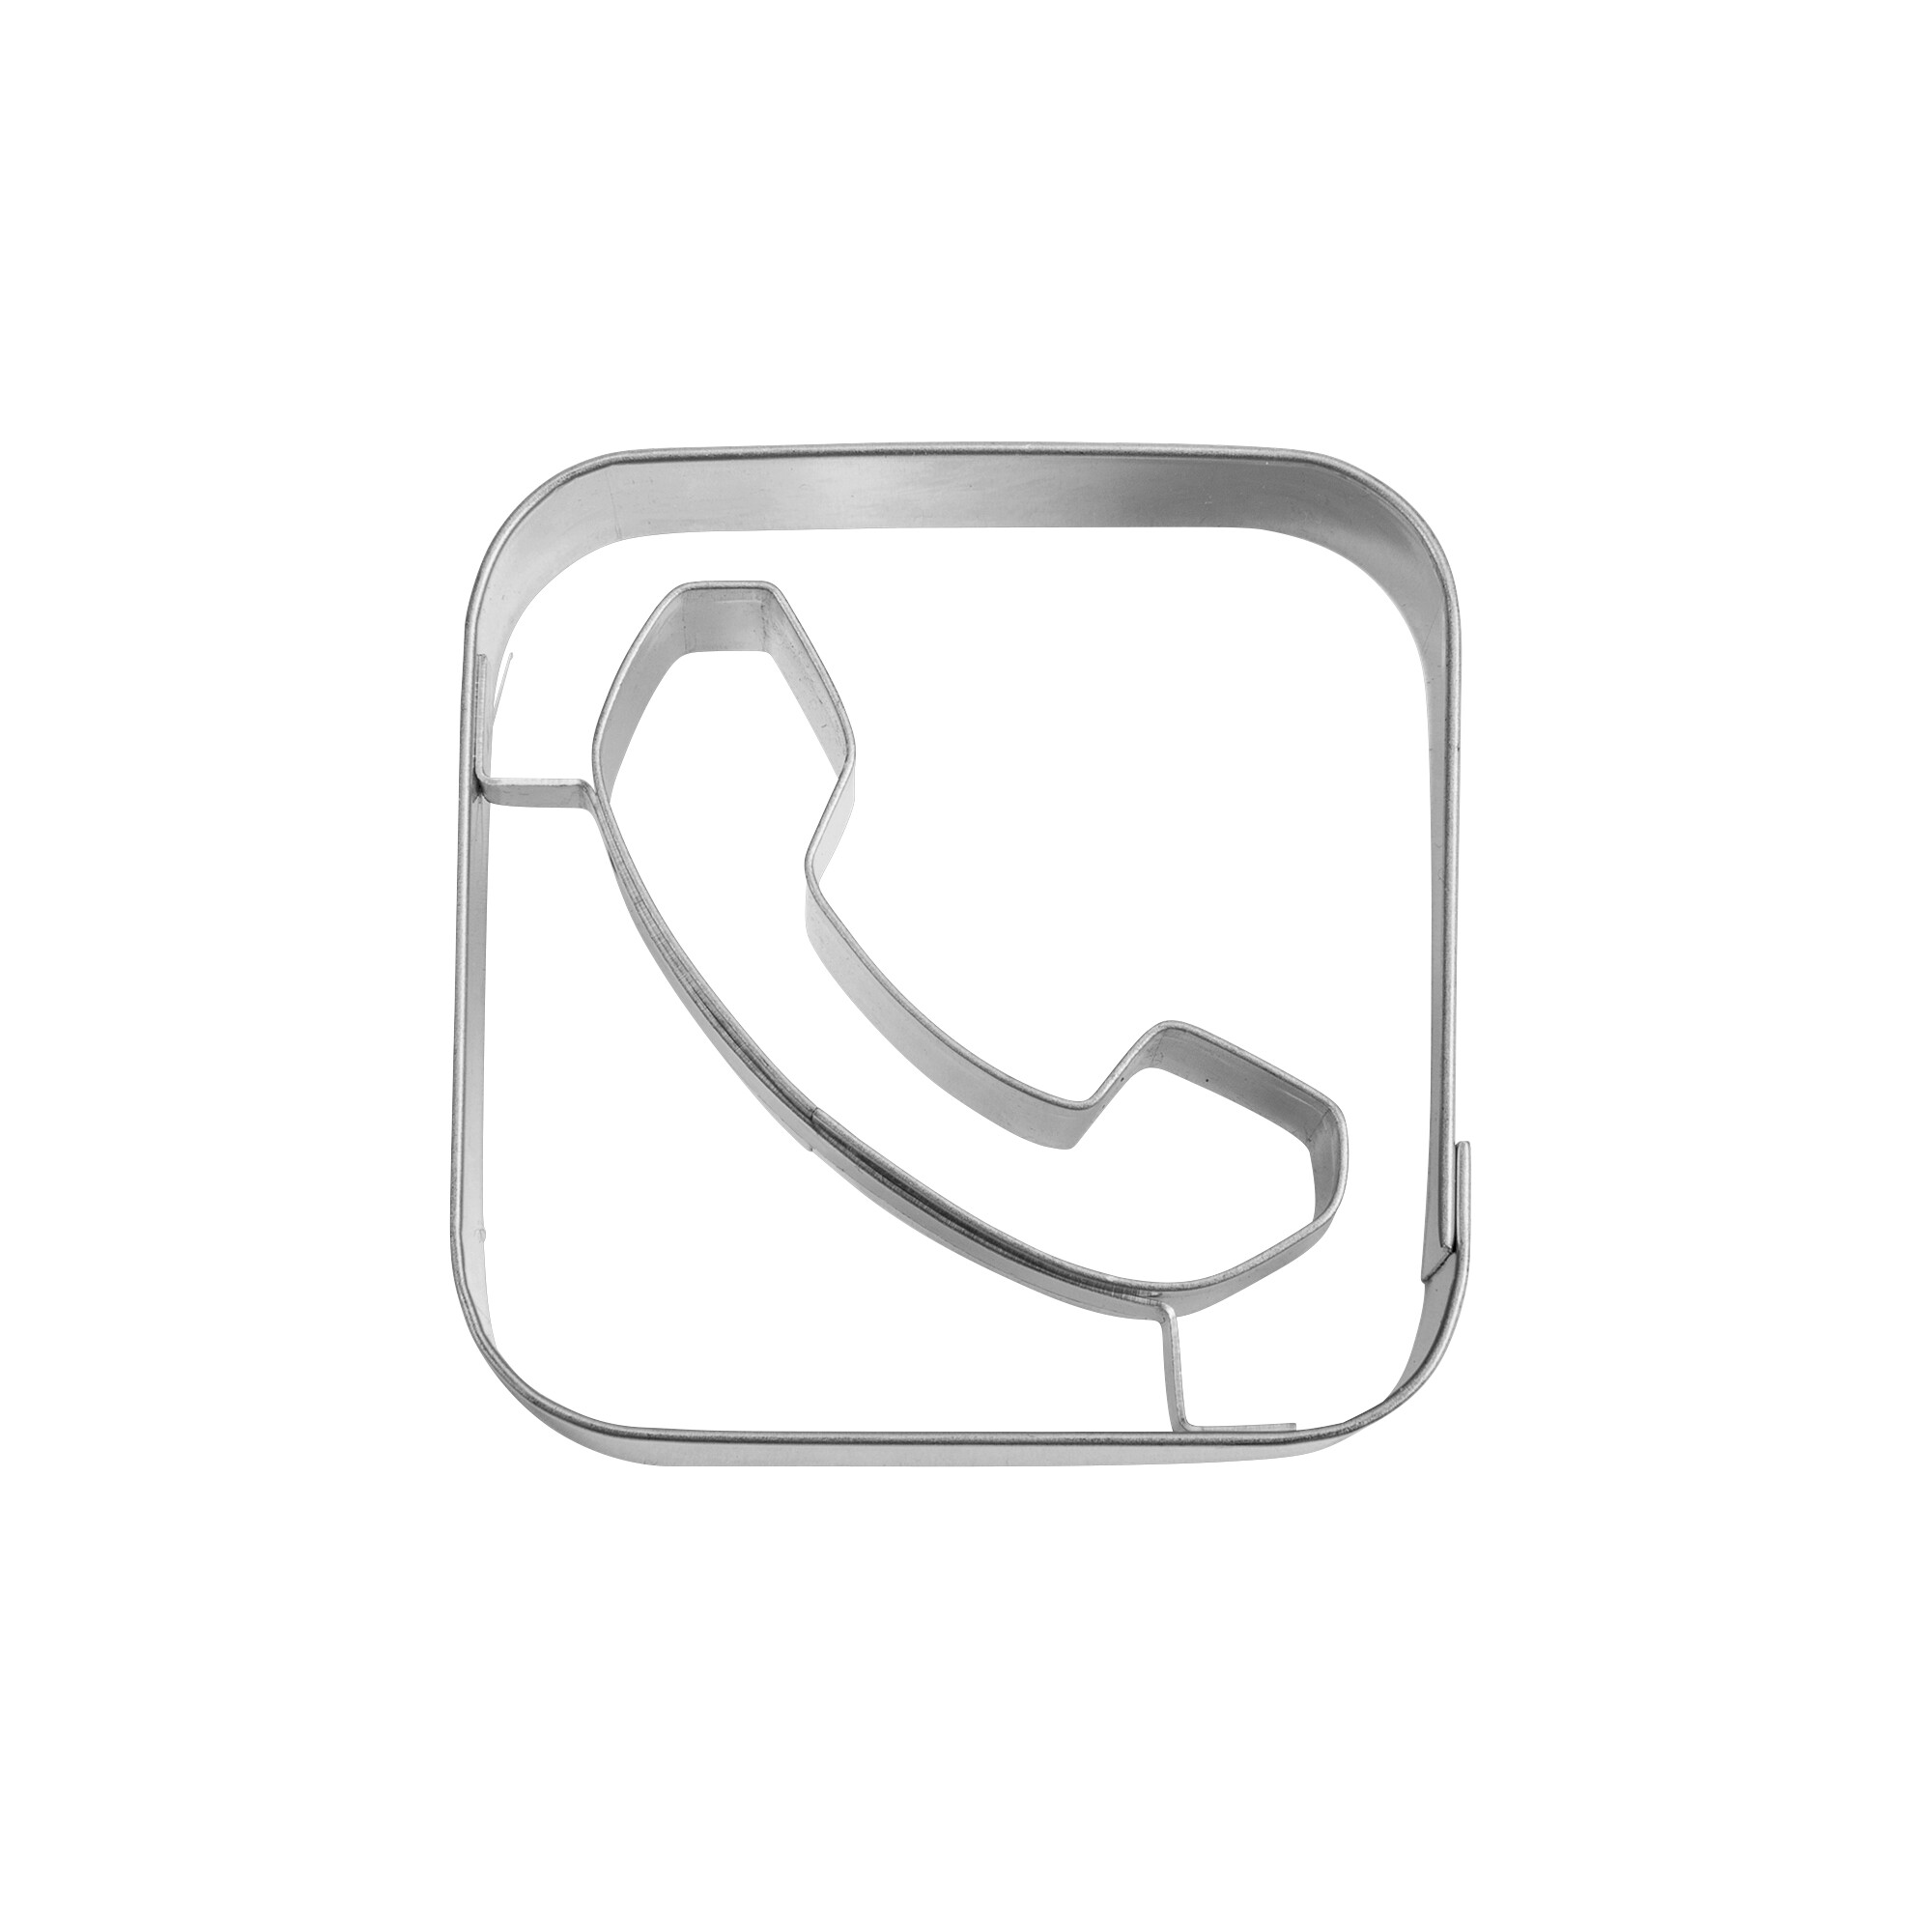 Cookie cutter with stamp – App-Cutter phone